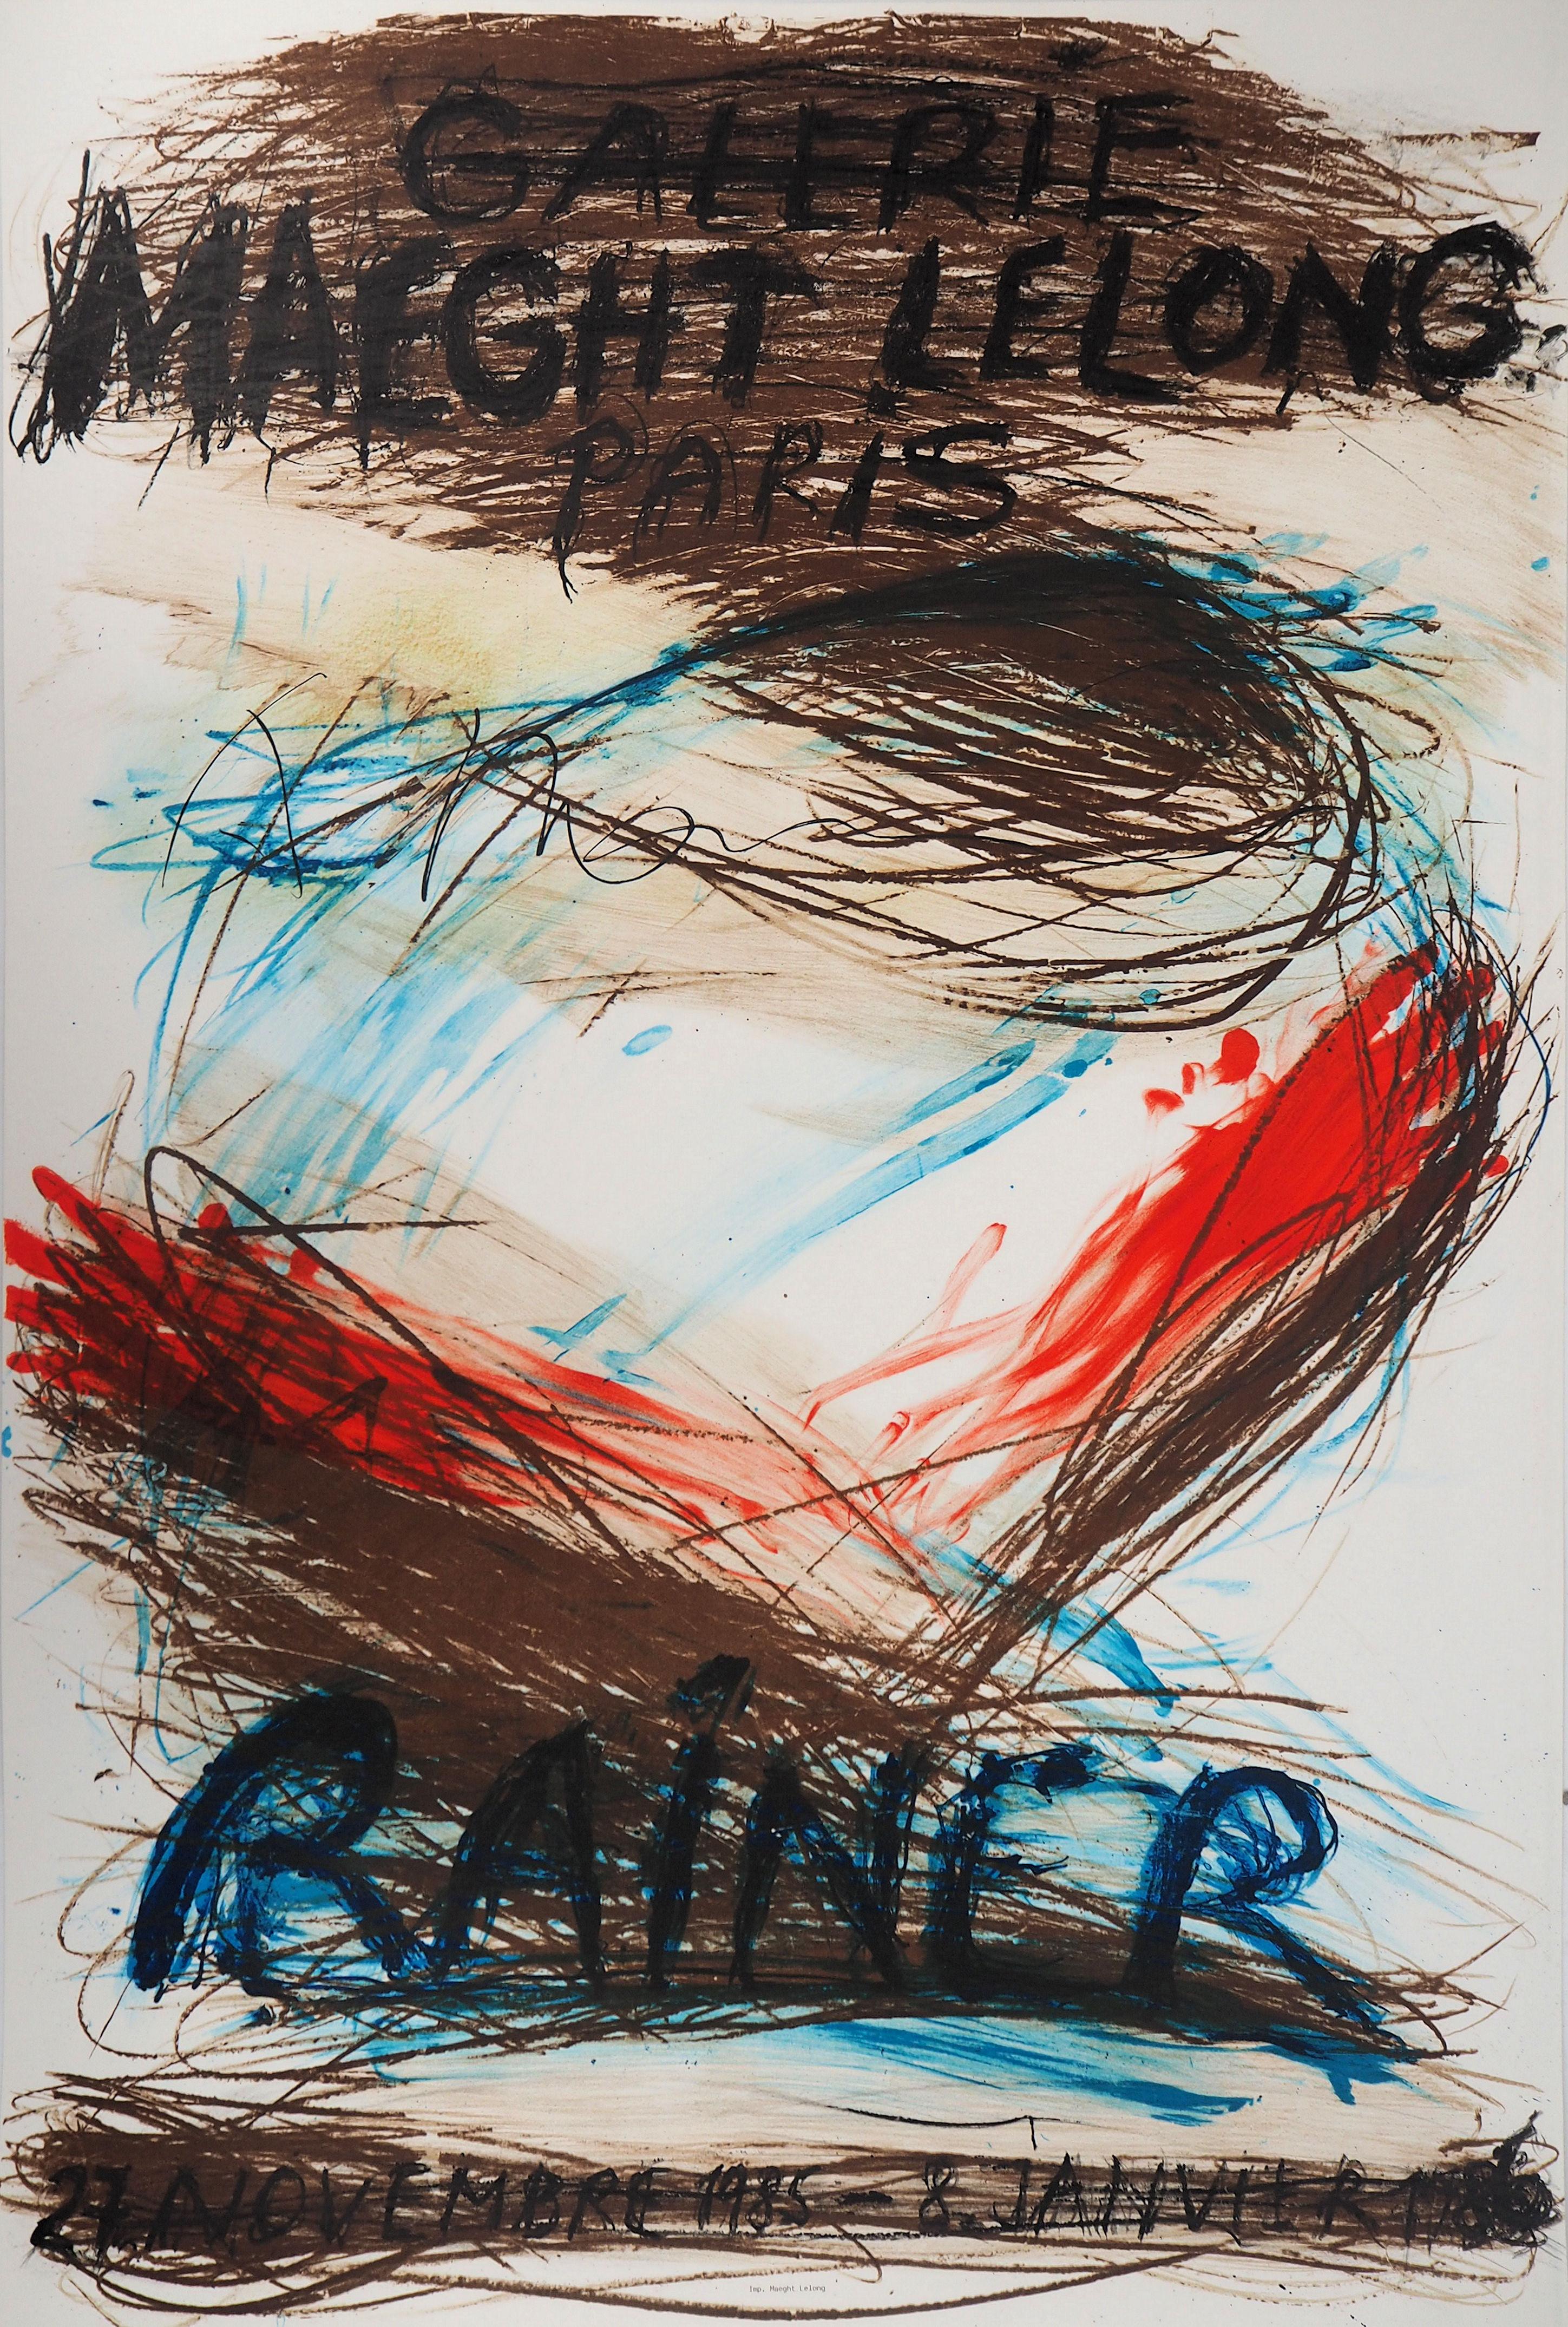 Arnulf Rainer Abstract Print - Abstract : Informal Composition - Original Vintage Lithographic Poster